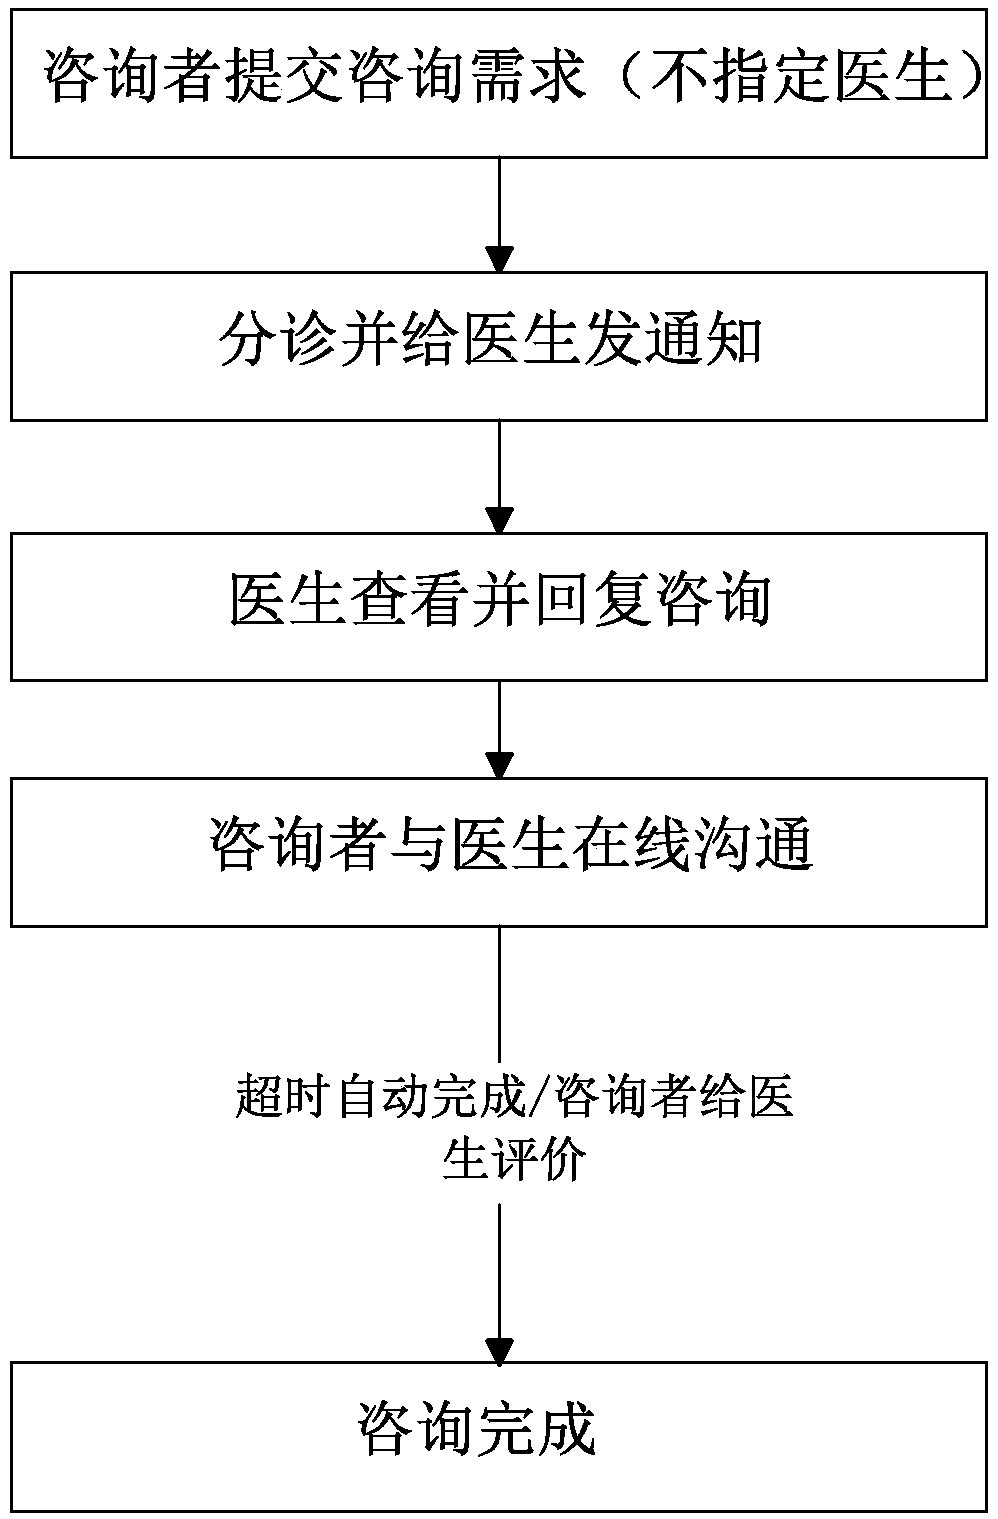 Remote medical inquiry and consultation system and method